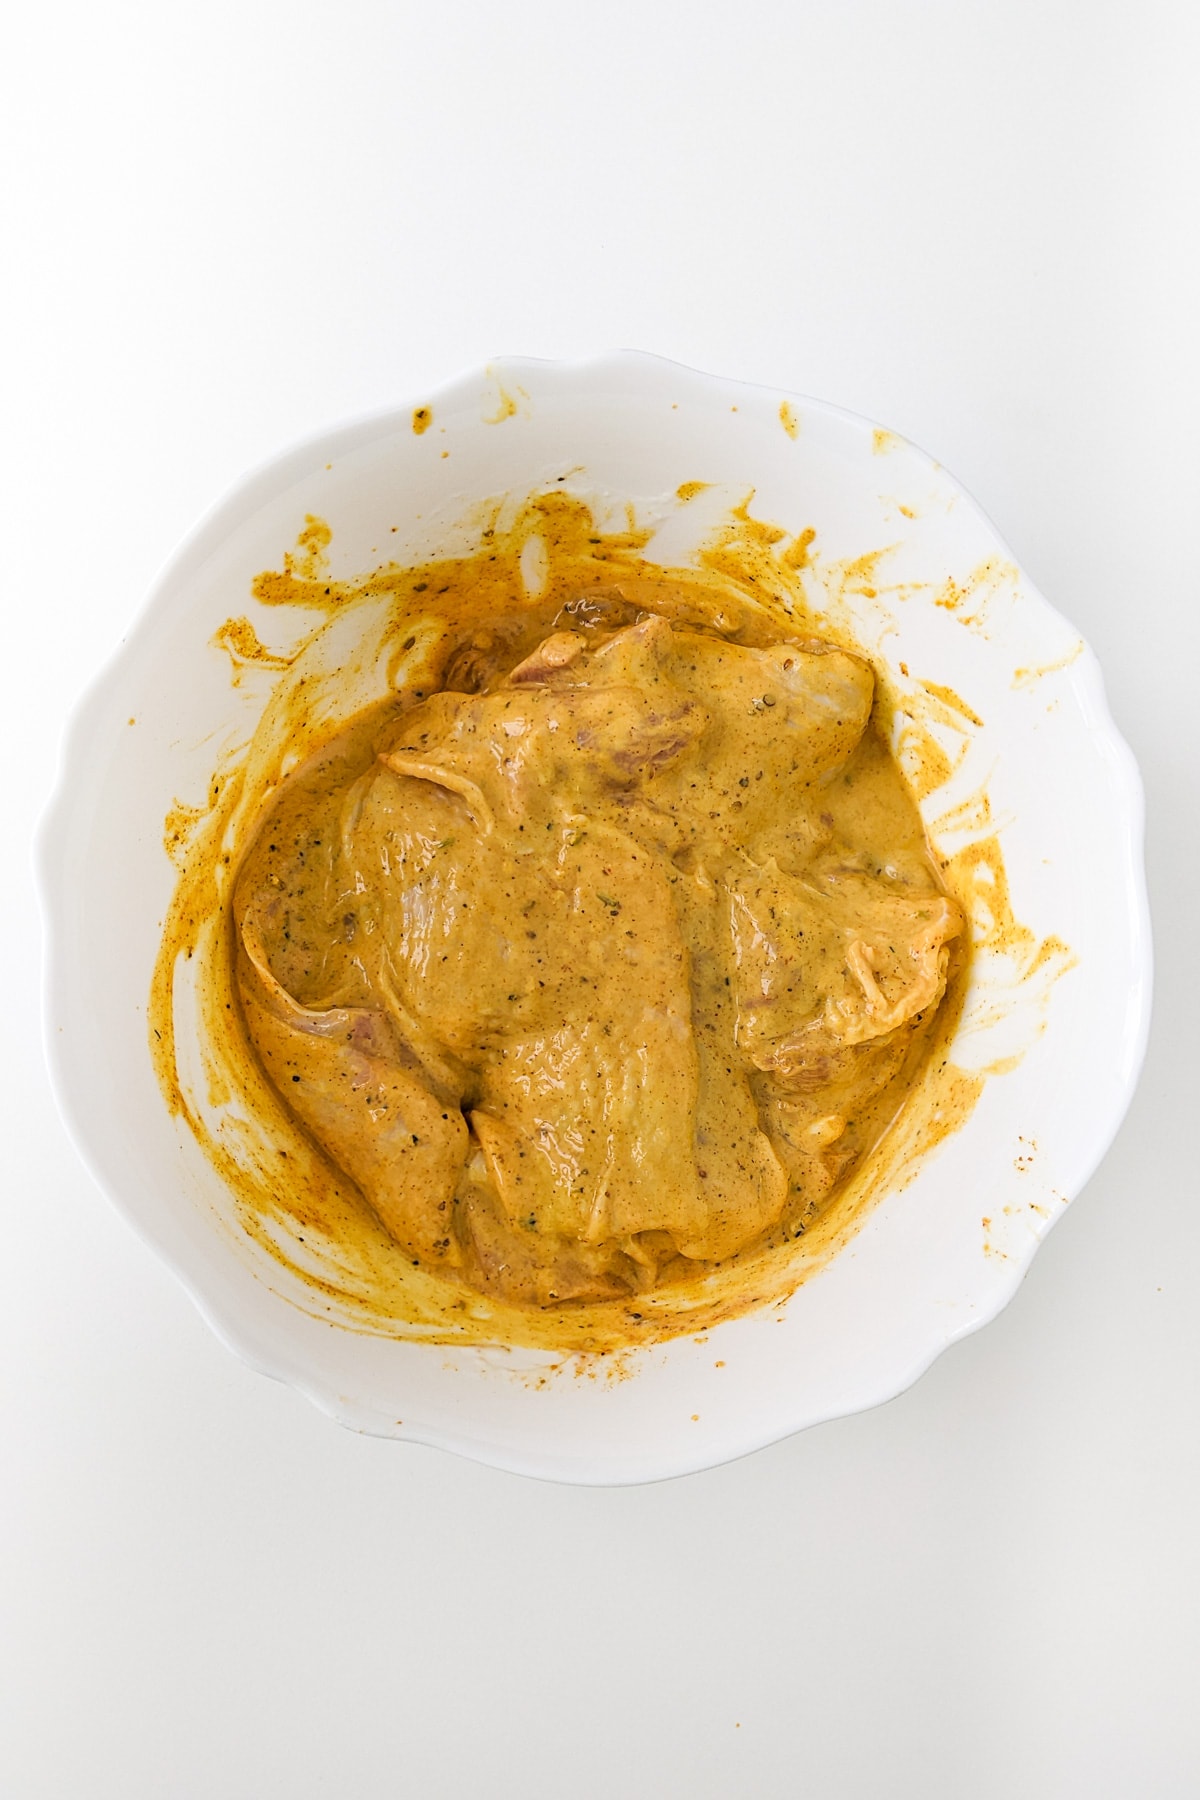 Chicken meat marinating with Arabic spices and yogurt for shawarma.